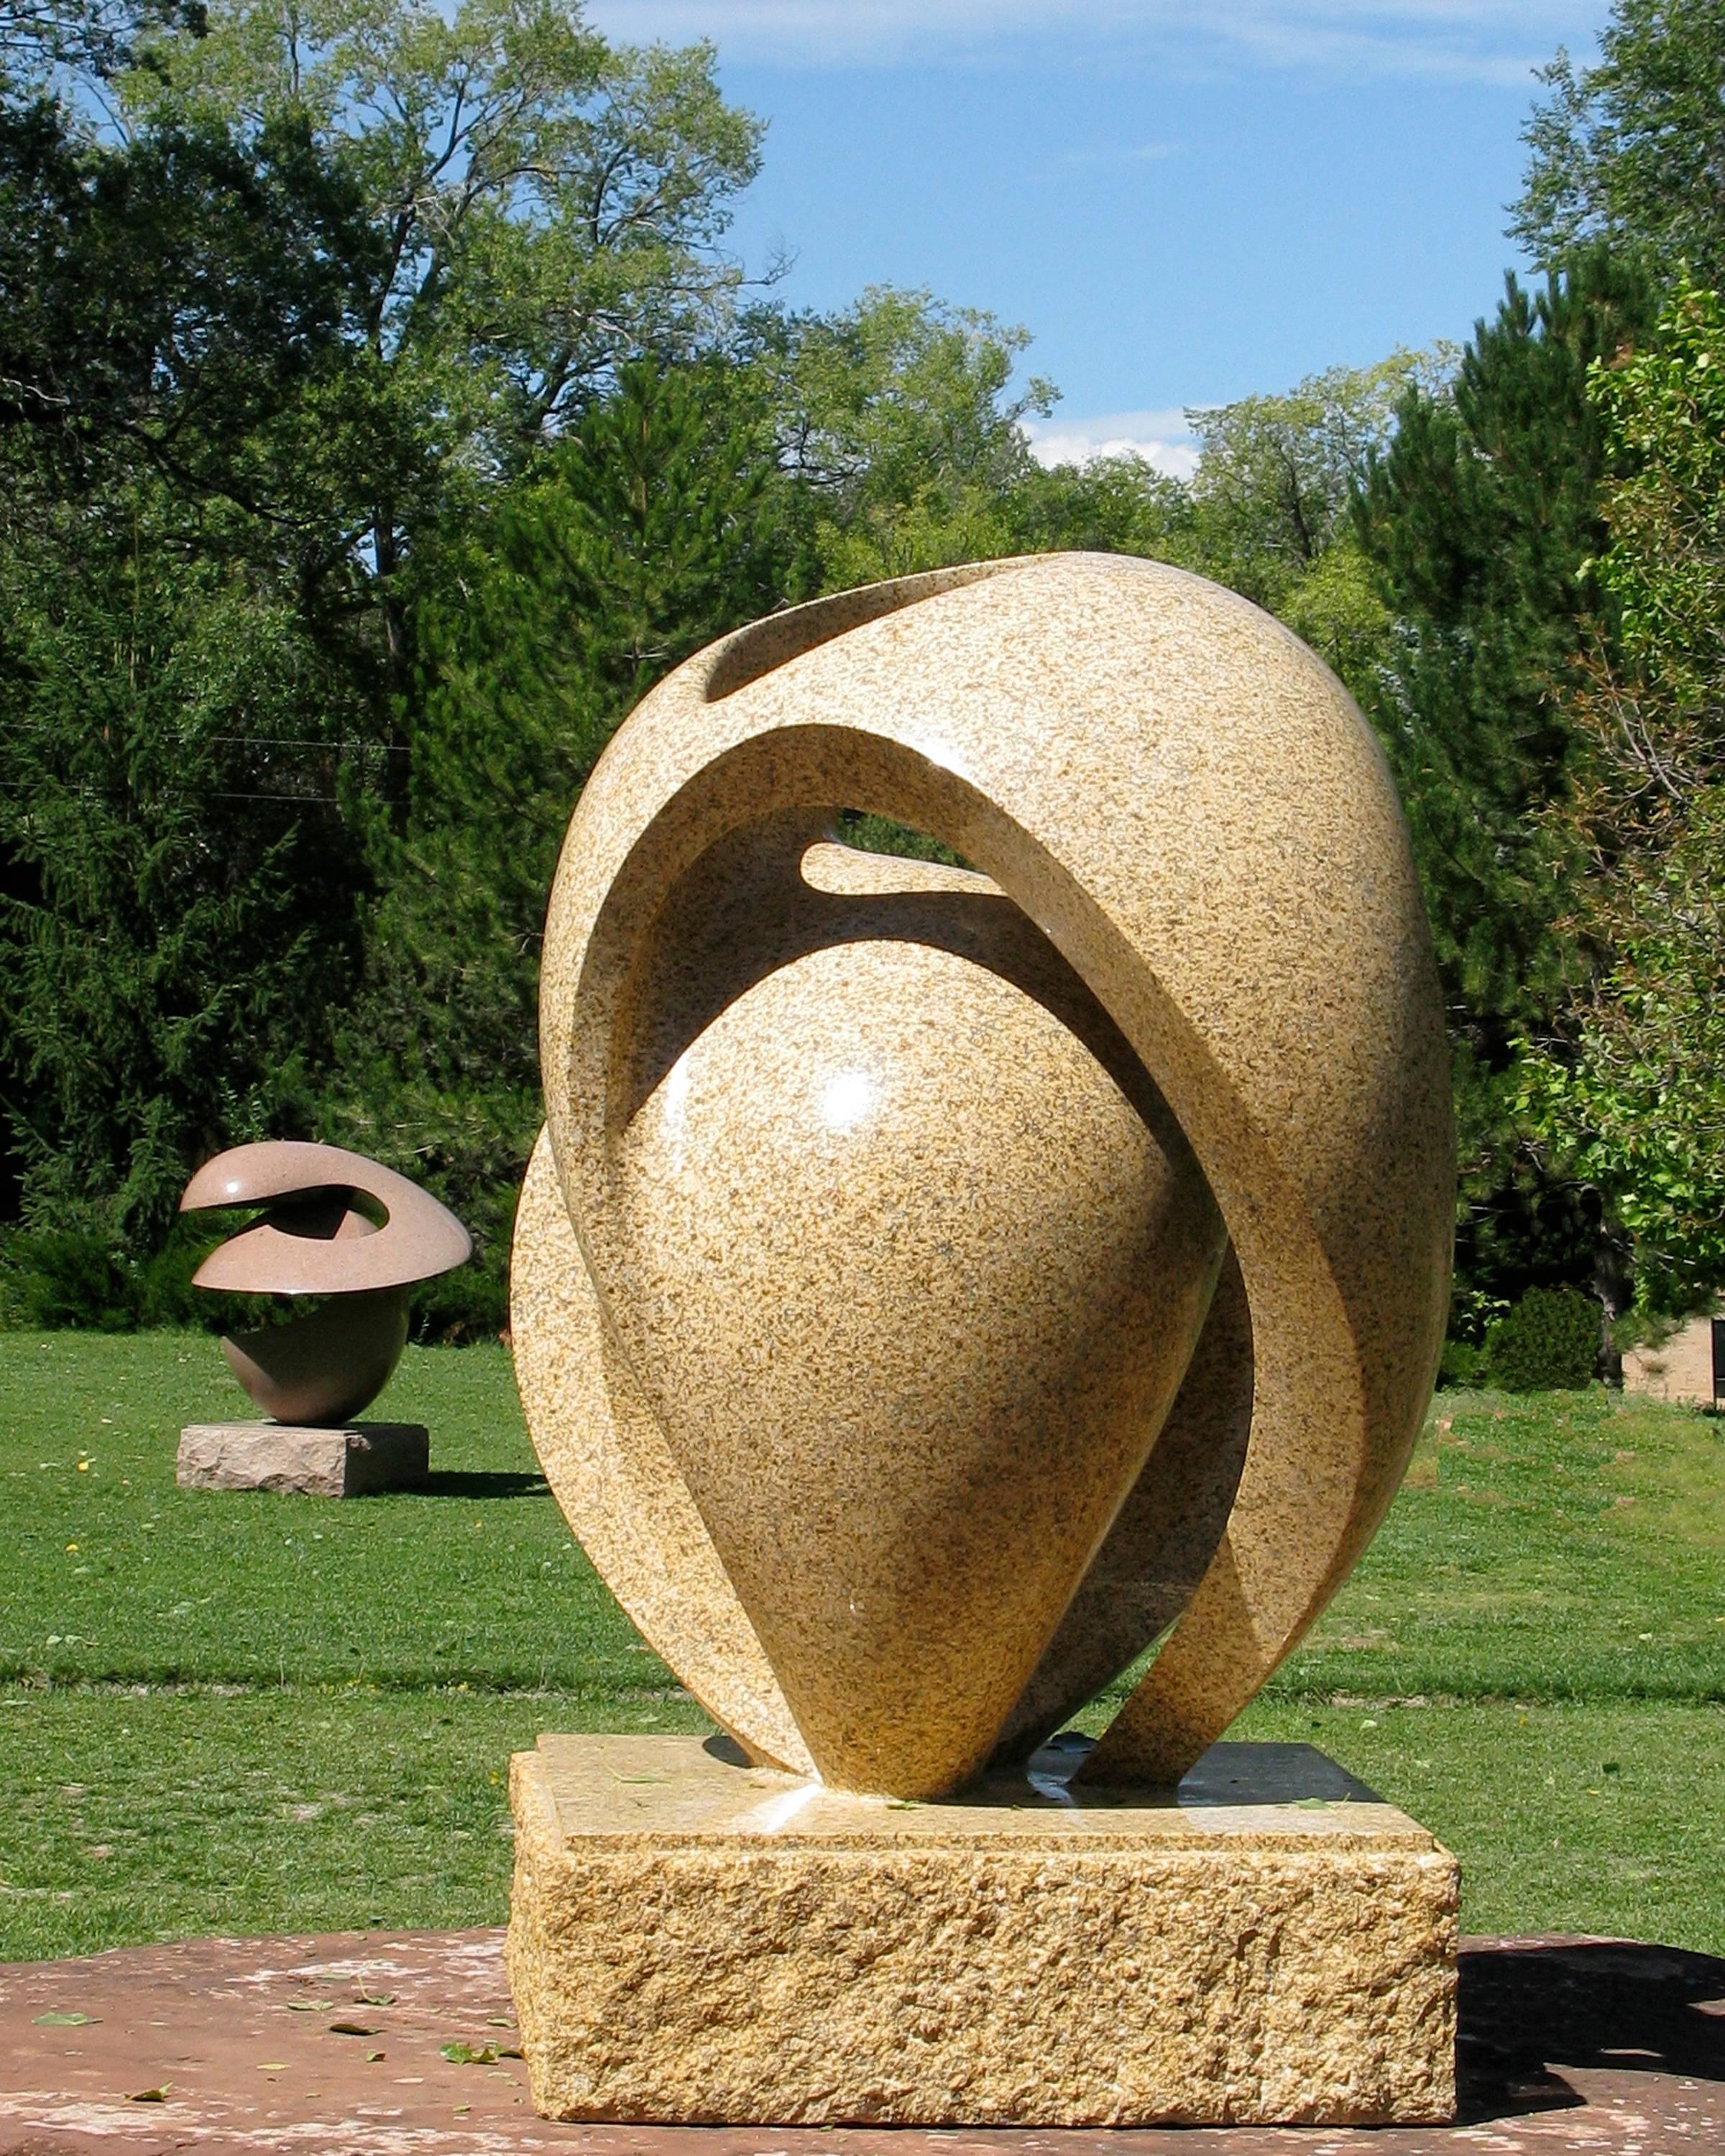 Escutcheon, by Khang Pham-New gold granite, contemporary abstract sculpture  

Polished yellow/golden granite abstract sculpture perfect for installation in a sculpture garden or indoors. Granite is a durable material that can withstand all types of